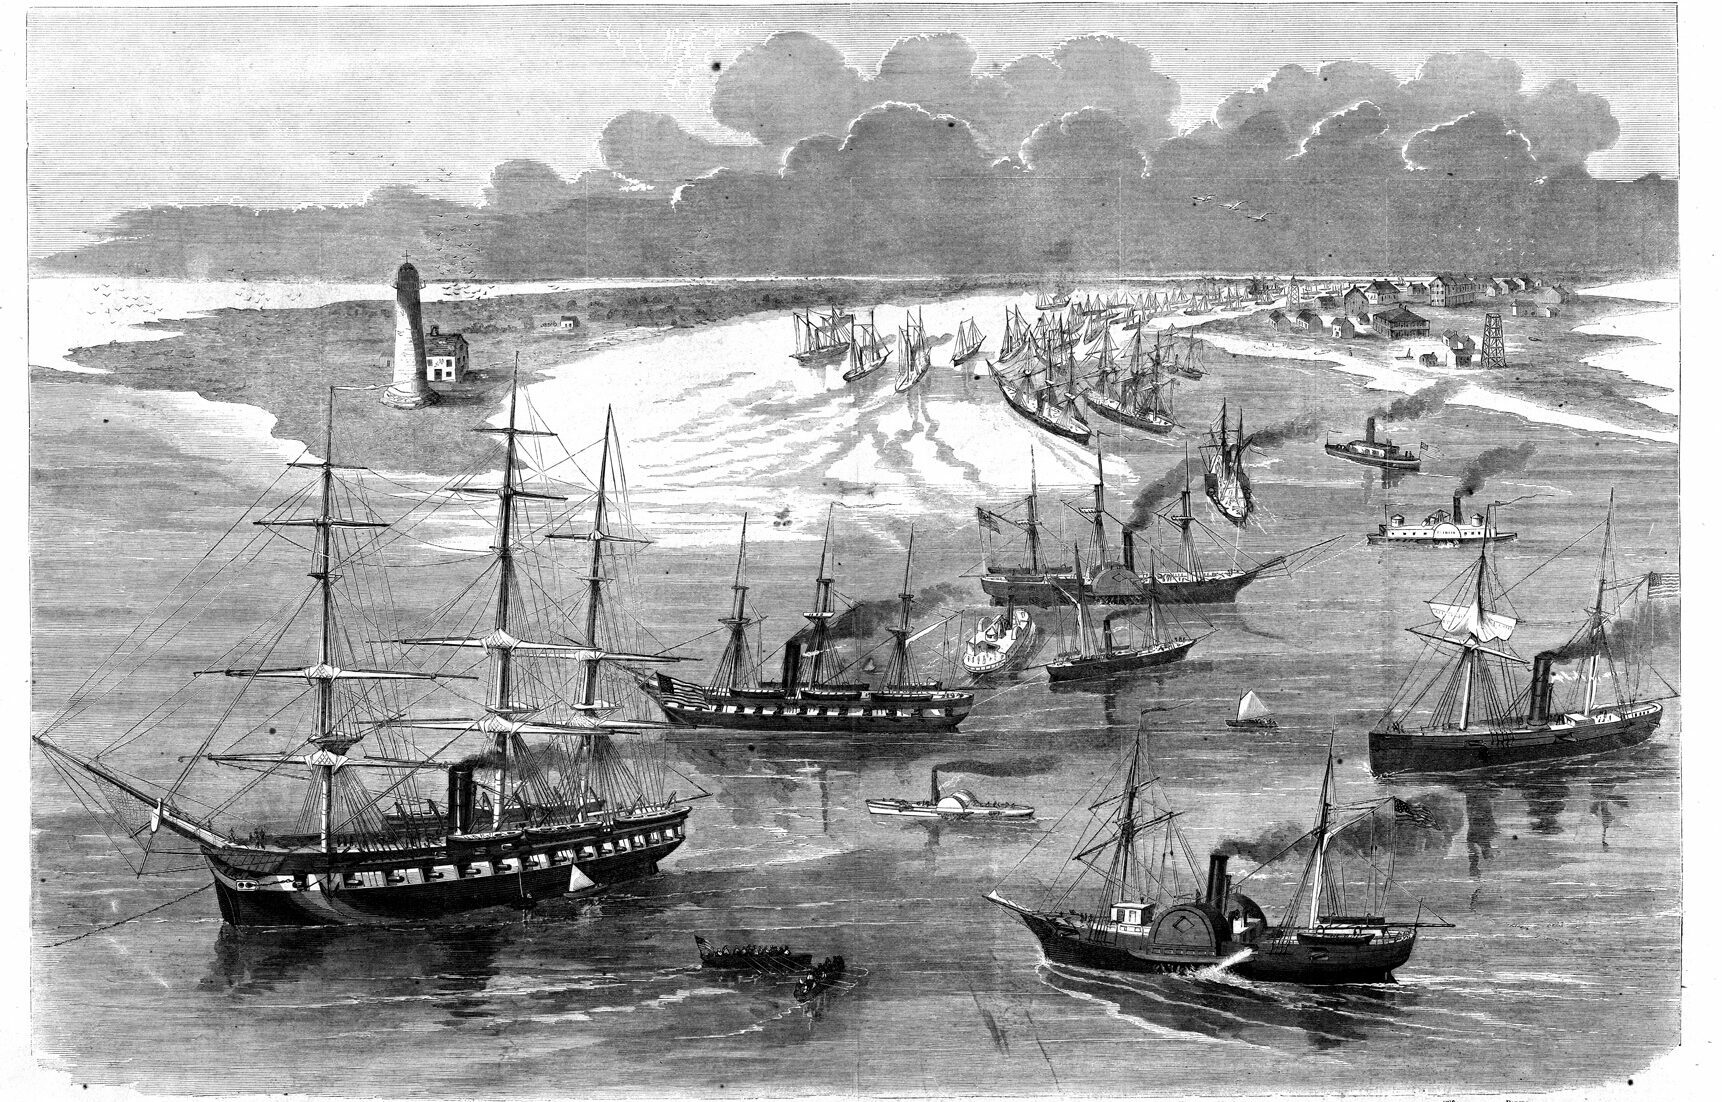 The Union fleet enters Mississippi River in a Harper’s Weekly illustration. To get past Plaqueminds Bend, where the two forts were situated, the sailing ships had to tack against a four-knot current, thus exposing them to heavy fire from 115 heavy guns.